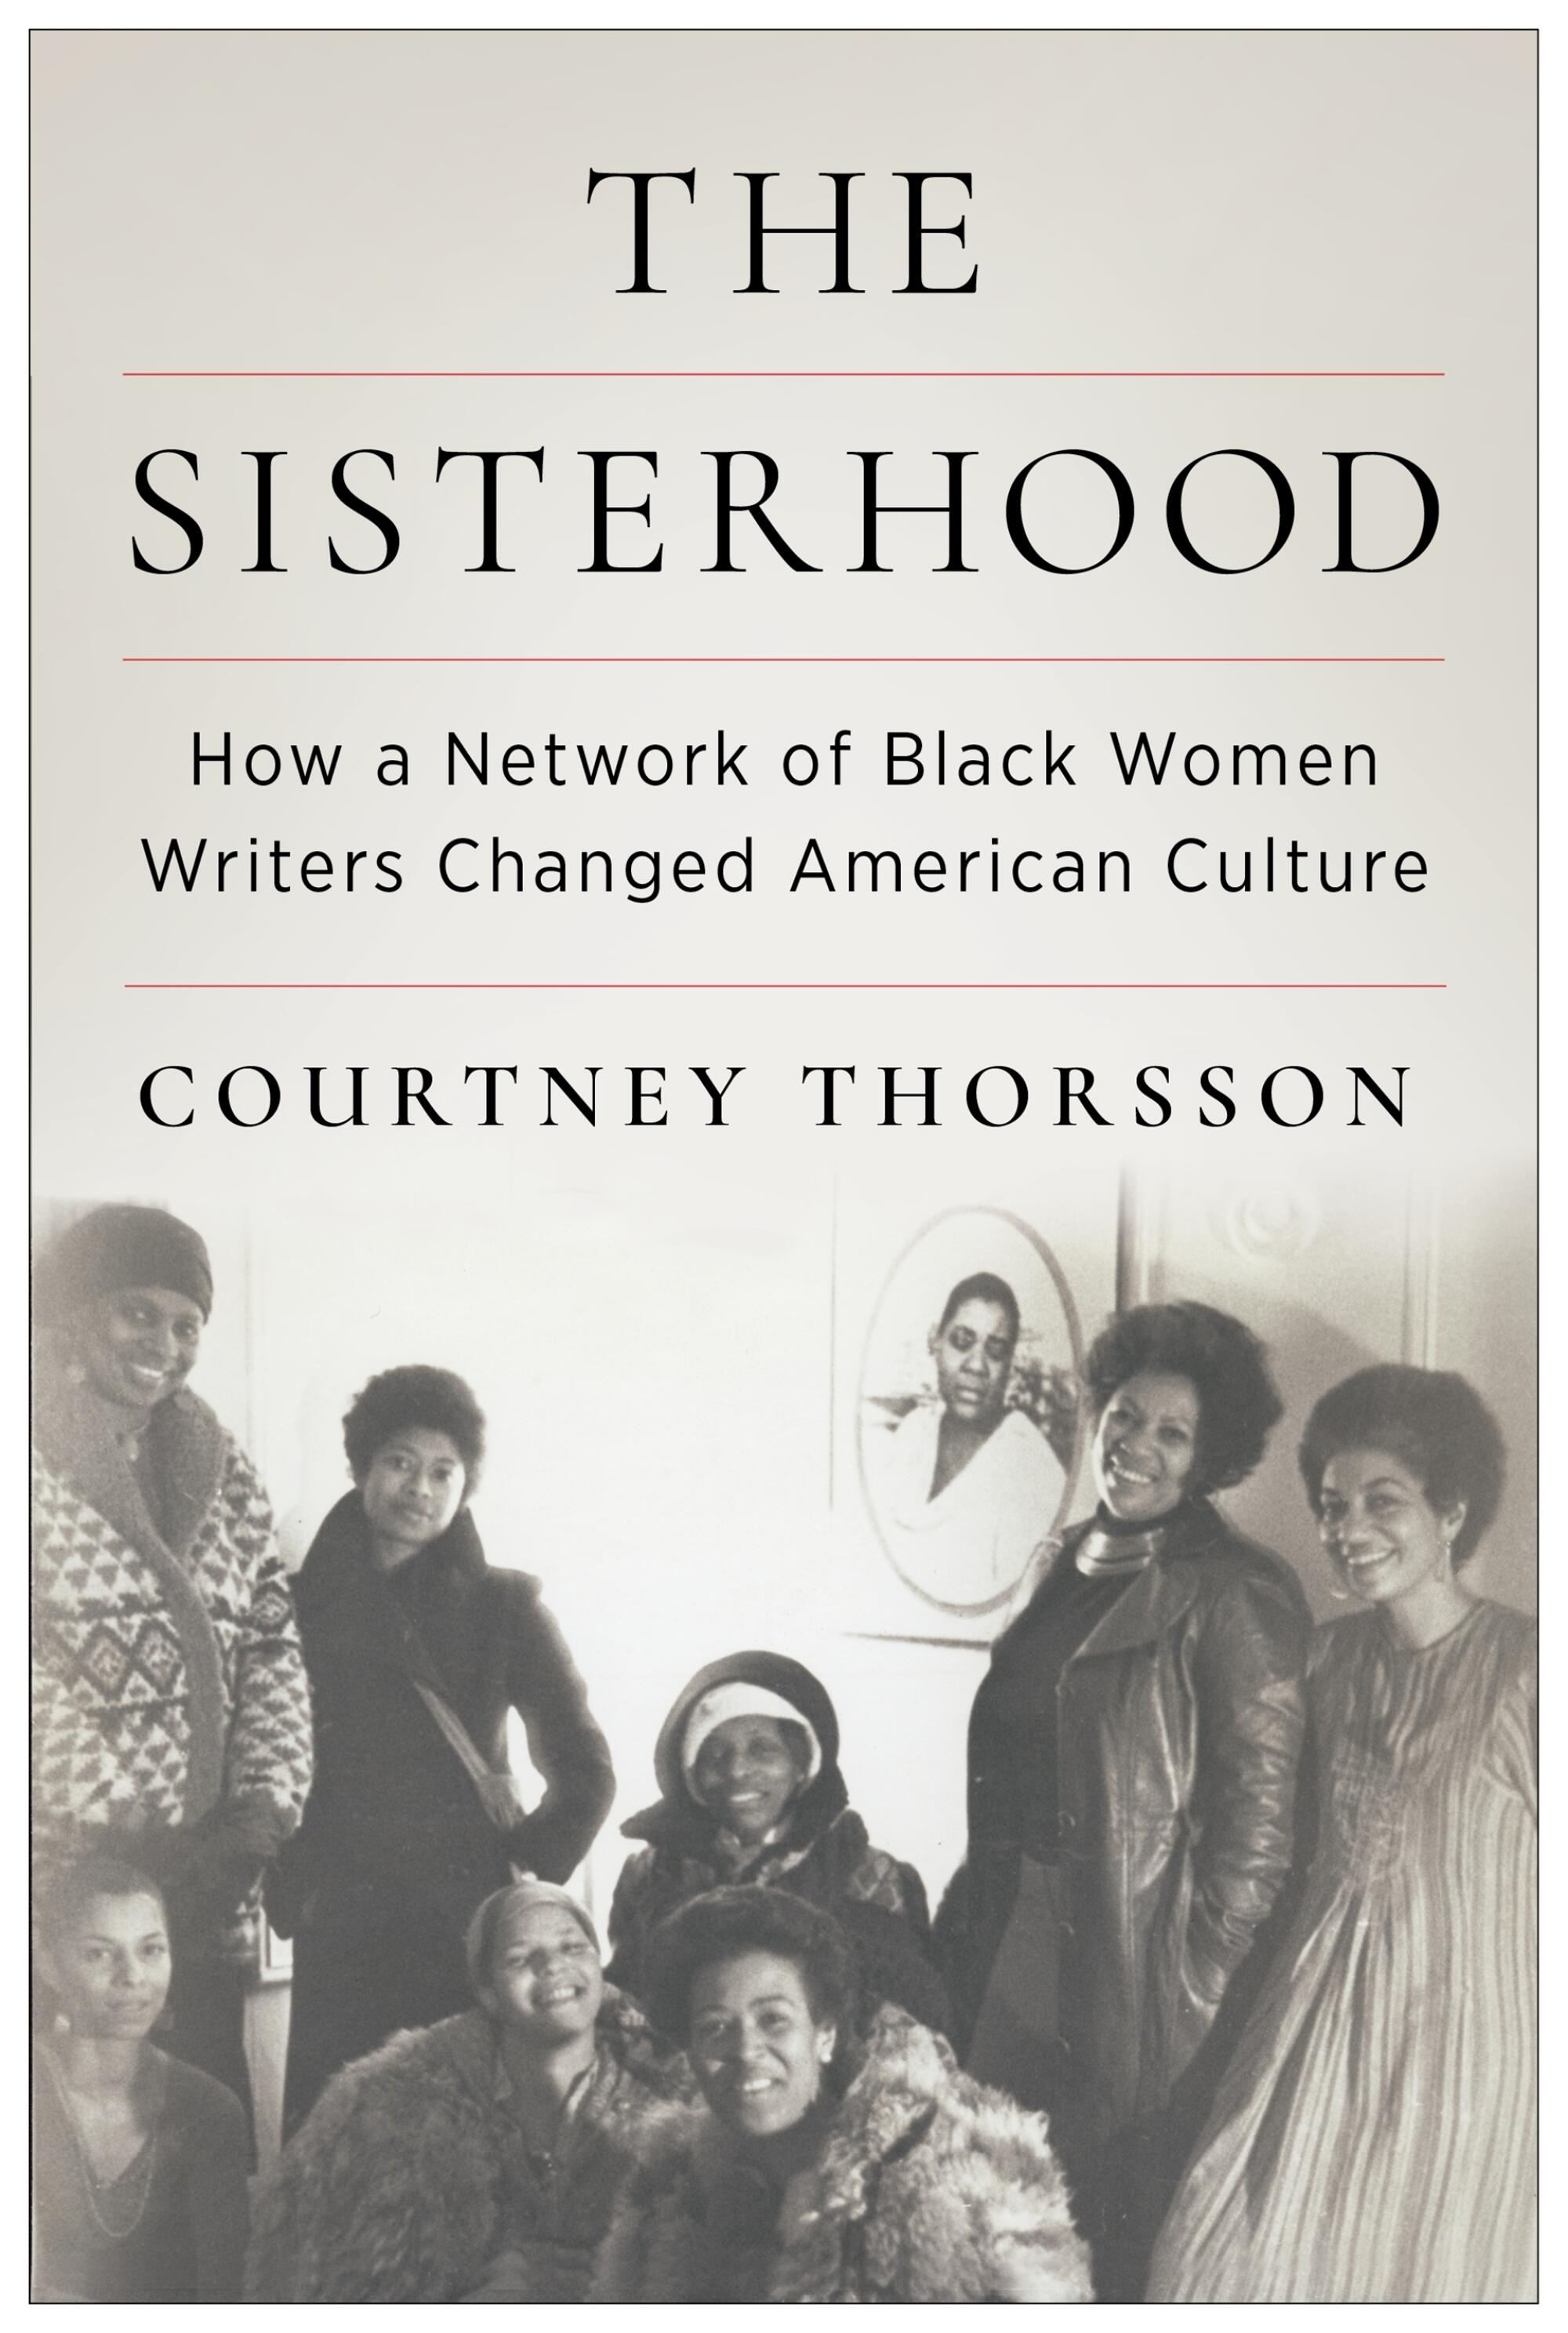 Book cover of "The Sisterhood" by Courtney Thorsson